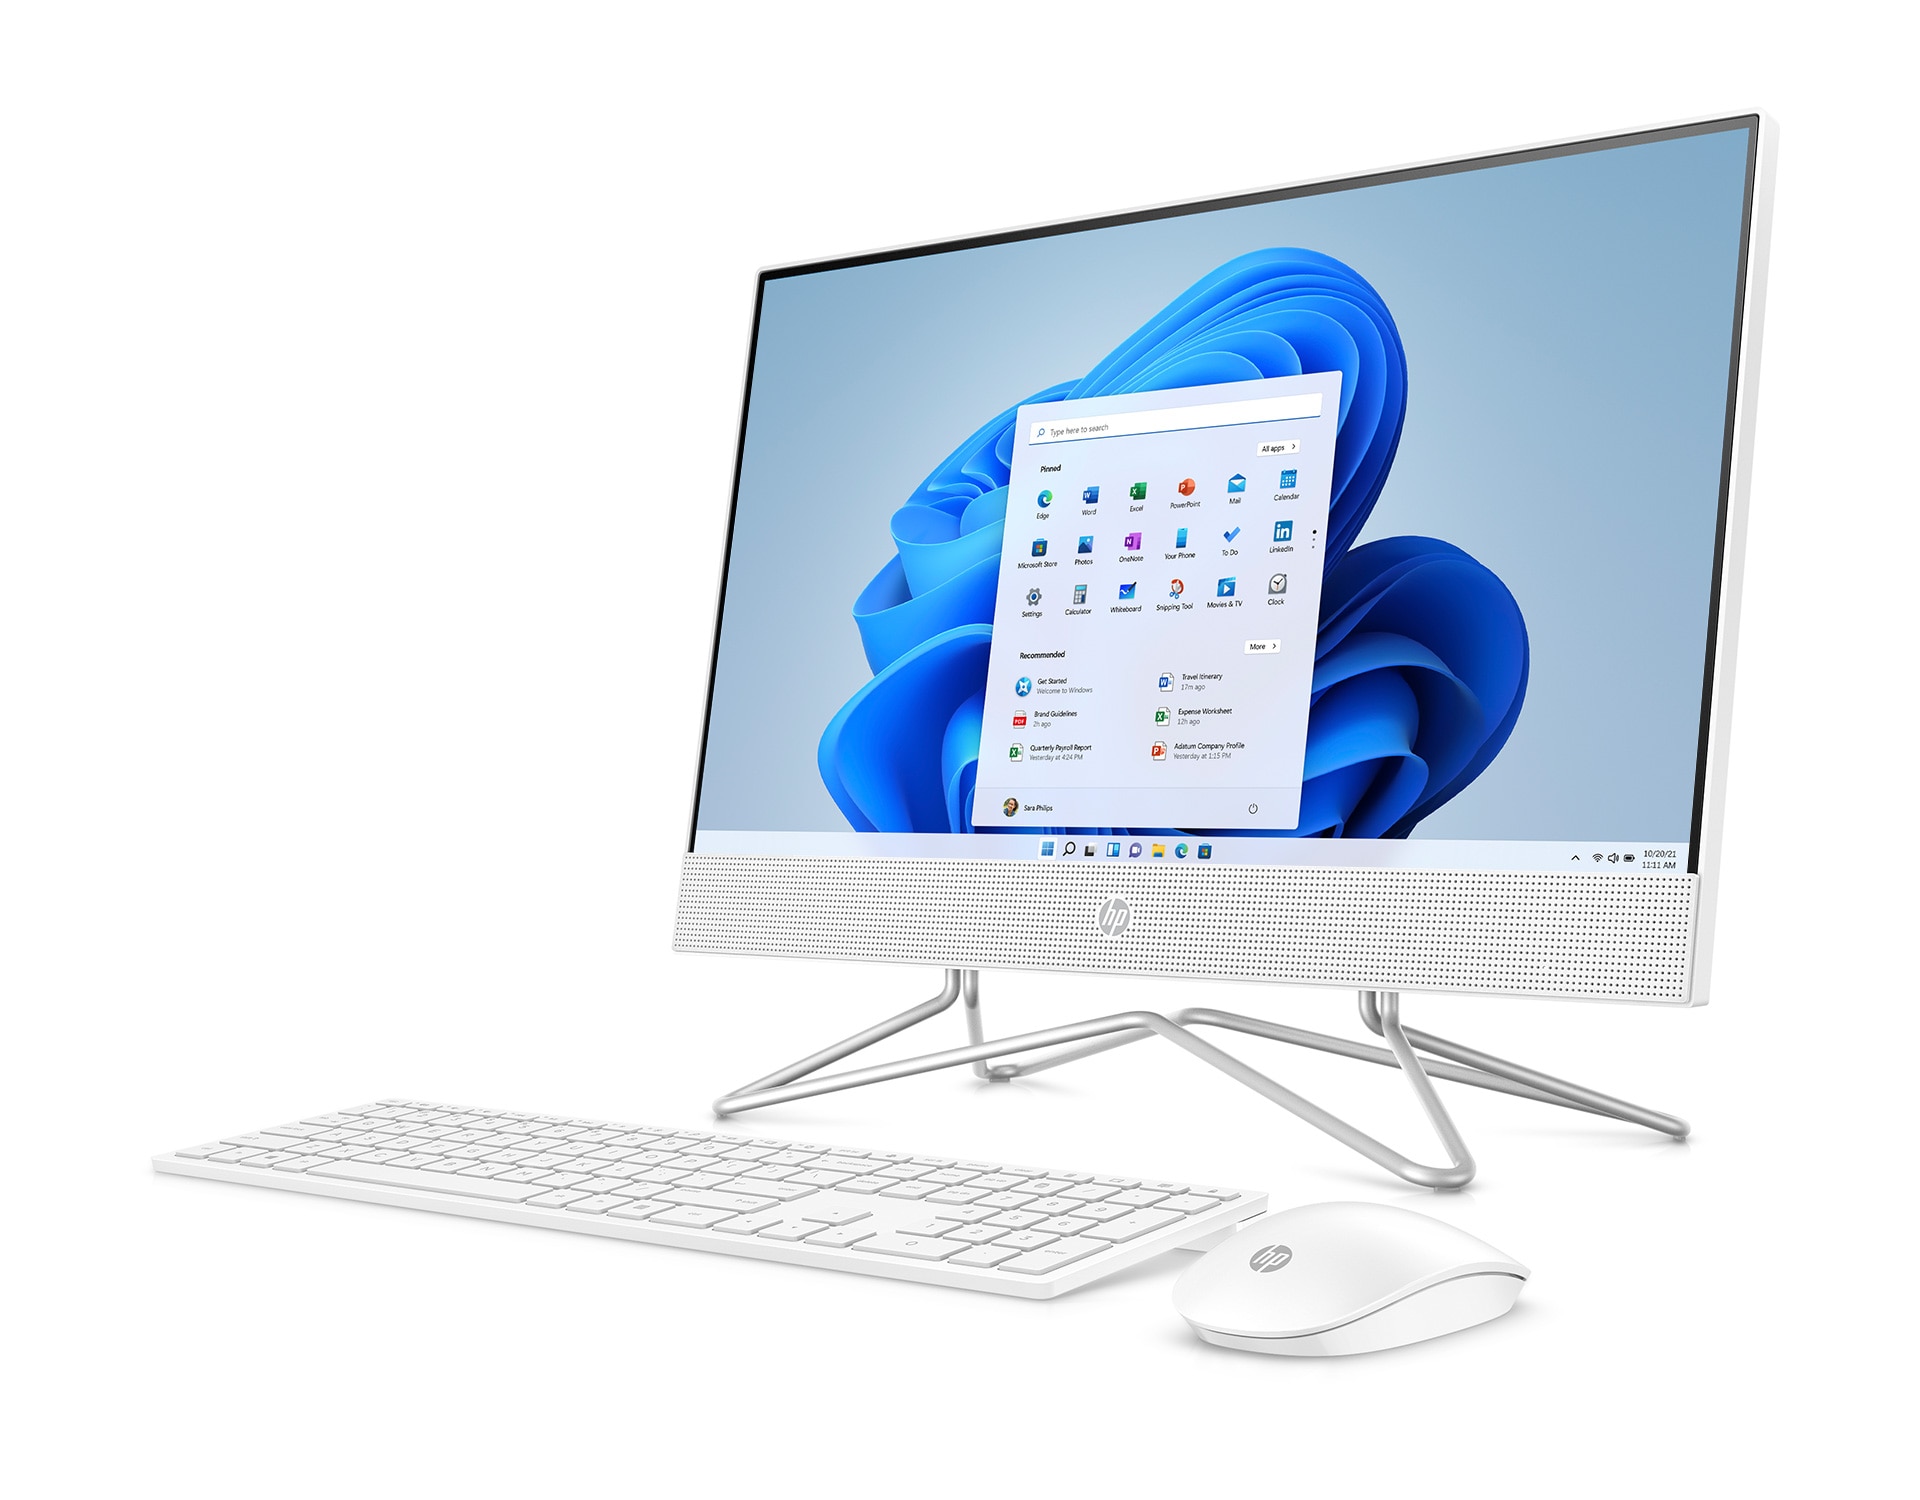 HP All-in-One 22-df（インテル） 製品詳細 - デスクトップパソコン 